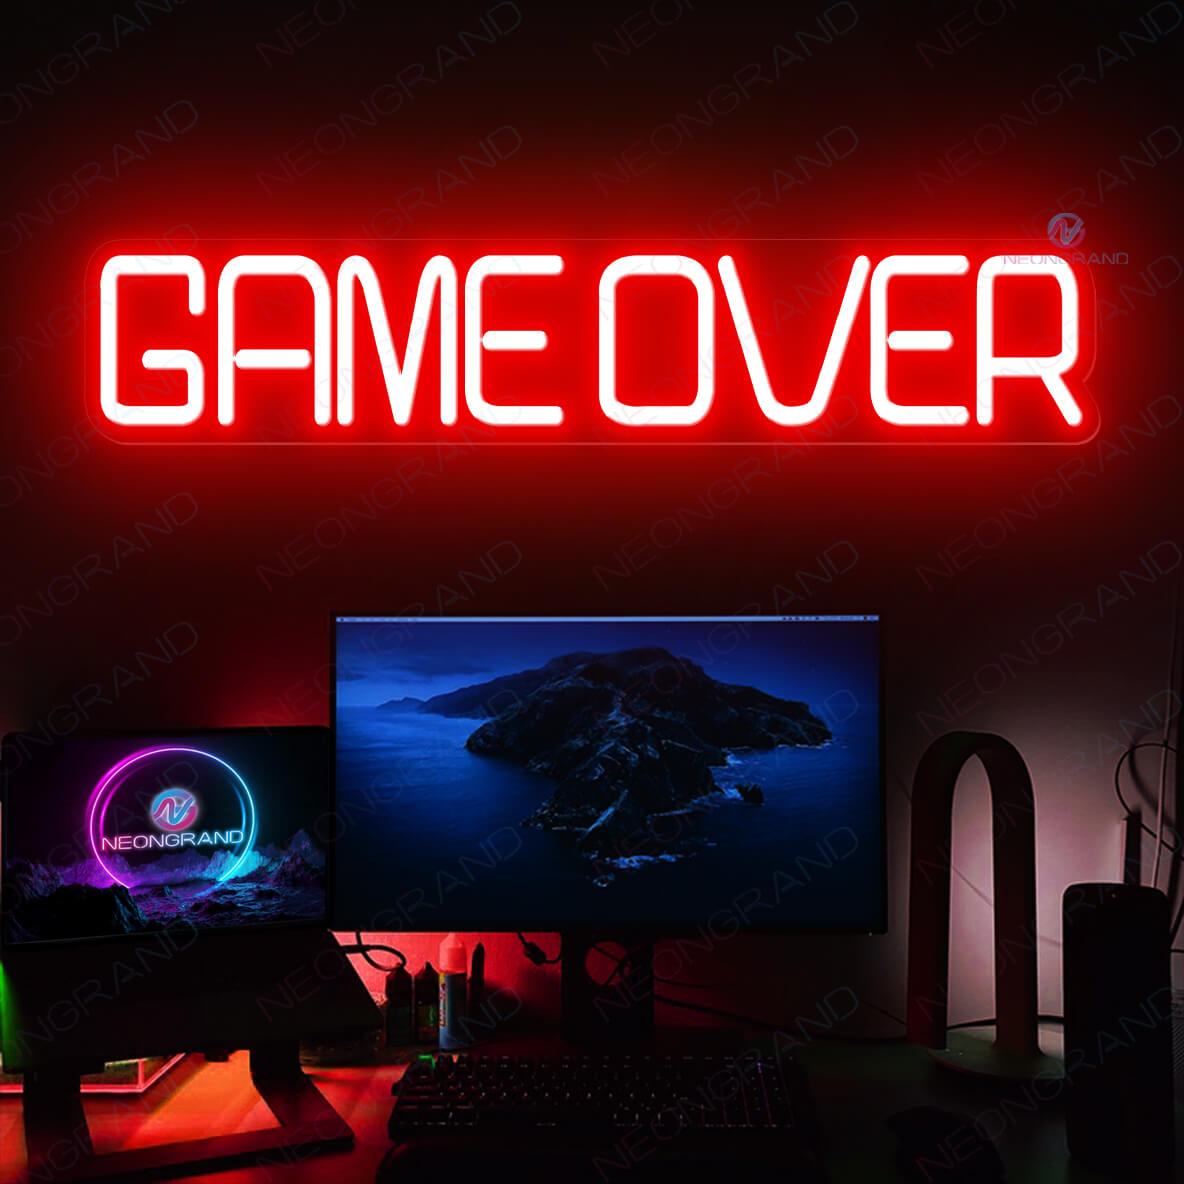 Game Over Neon Sign Arcade Gaming Room Led Light red wm